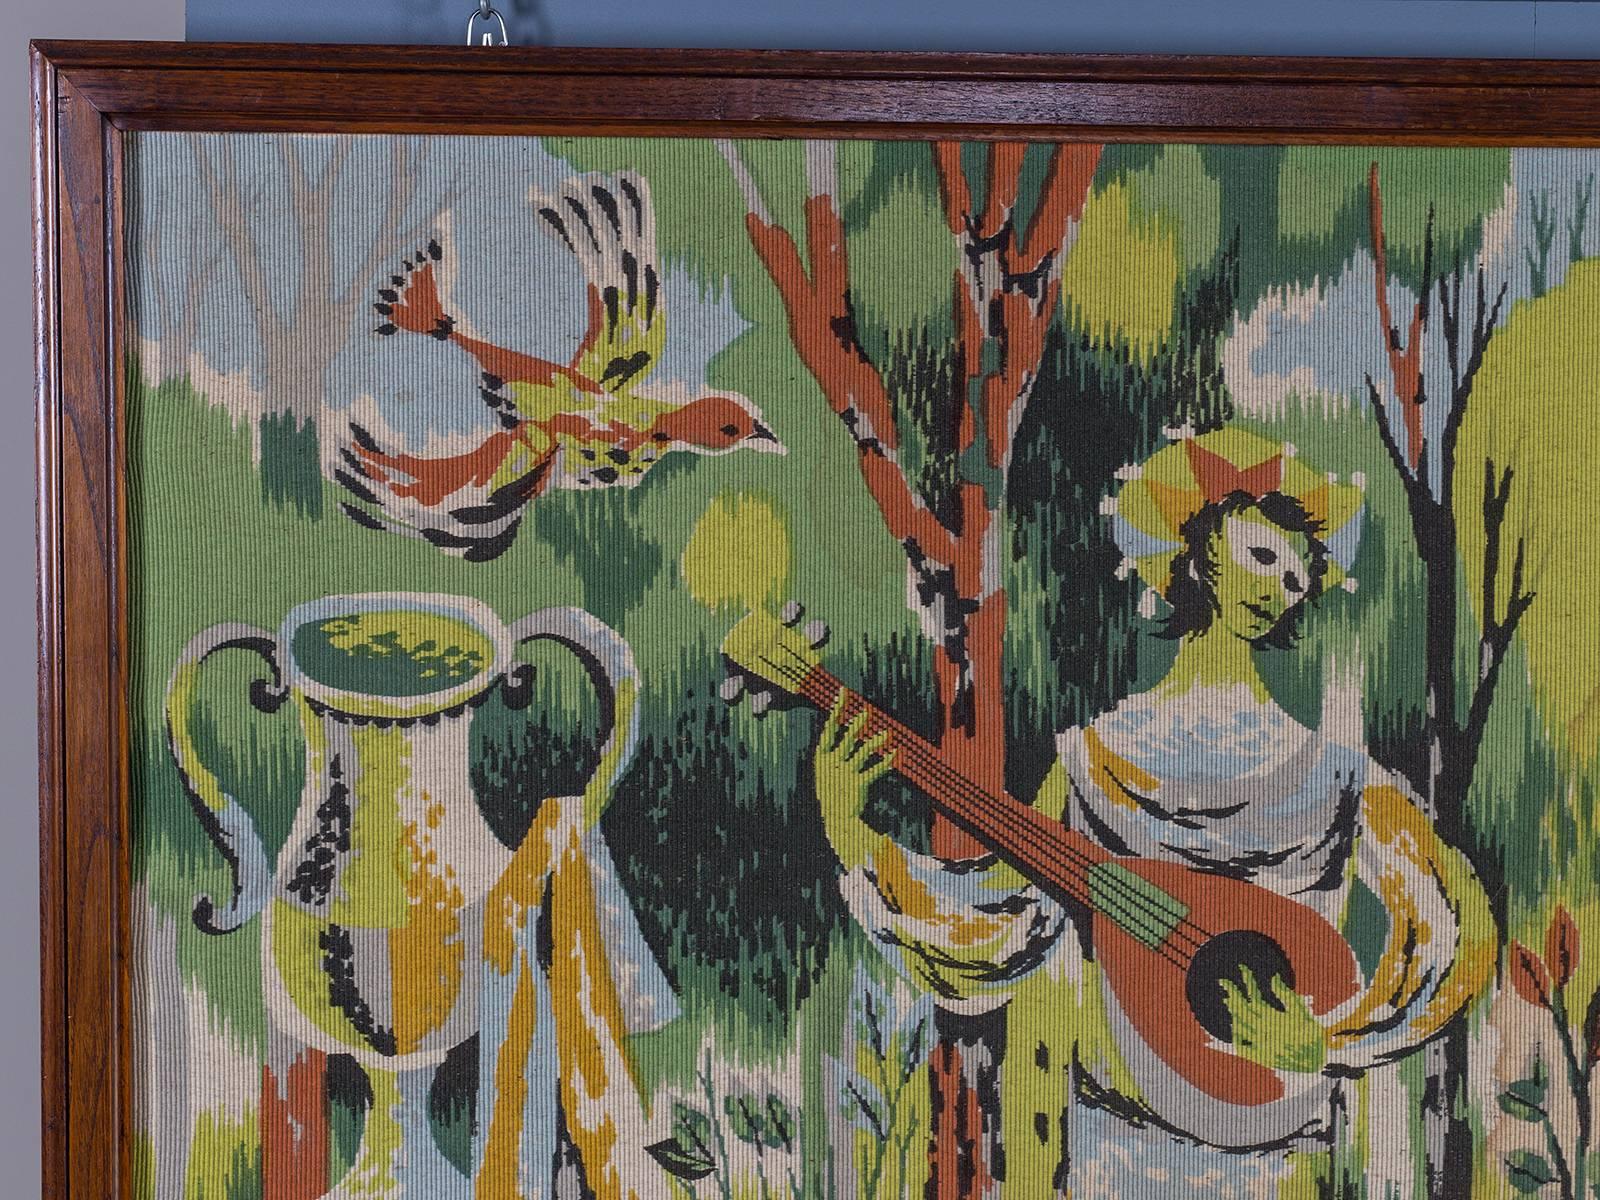 Mid-20th Century Vintage French Tapestry Neoclassical Scene of Figures circa 1960 Original Frame For Sale